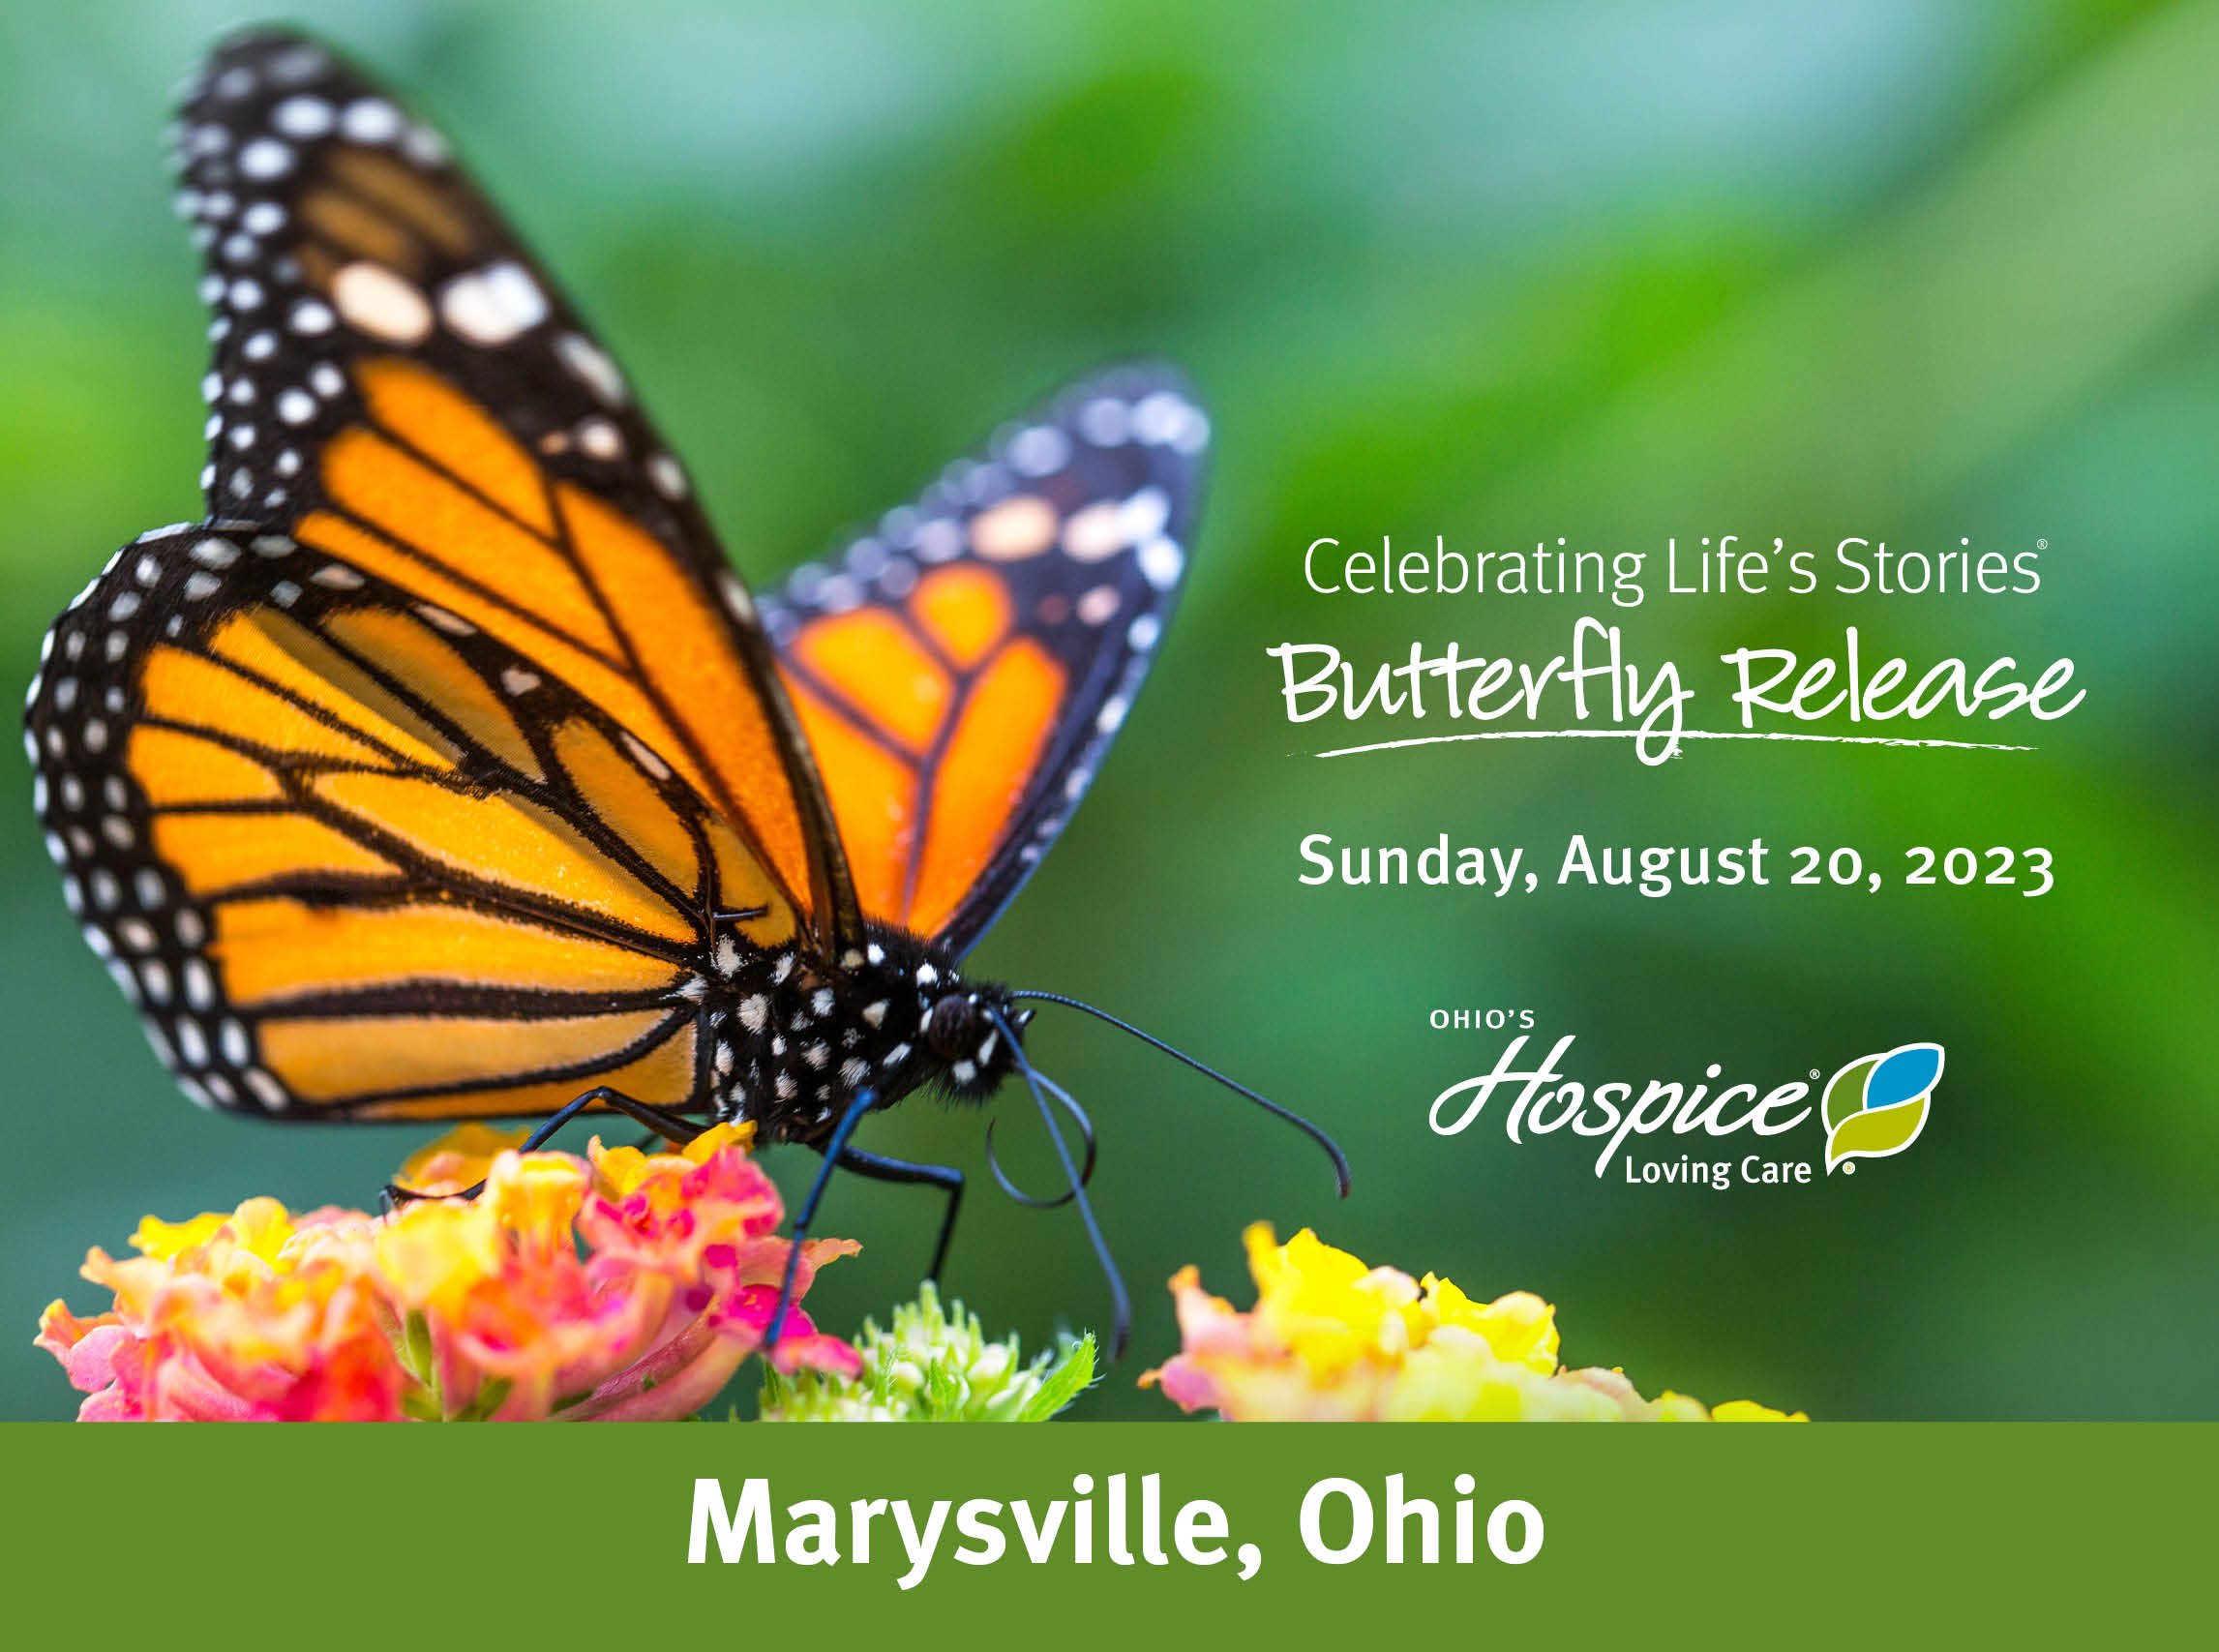 Celebrating Life's Stories Butterfly Release Sunday, August 20, 2023. Ohio's Hospice Loving Care. Marysville, Ohio